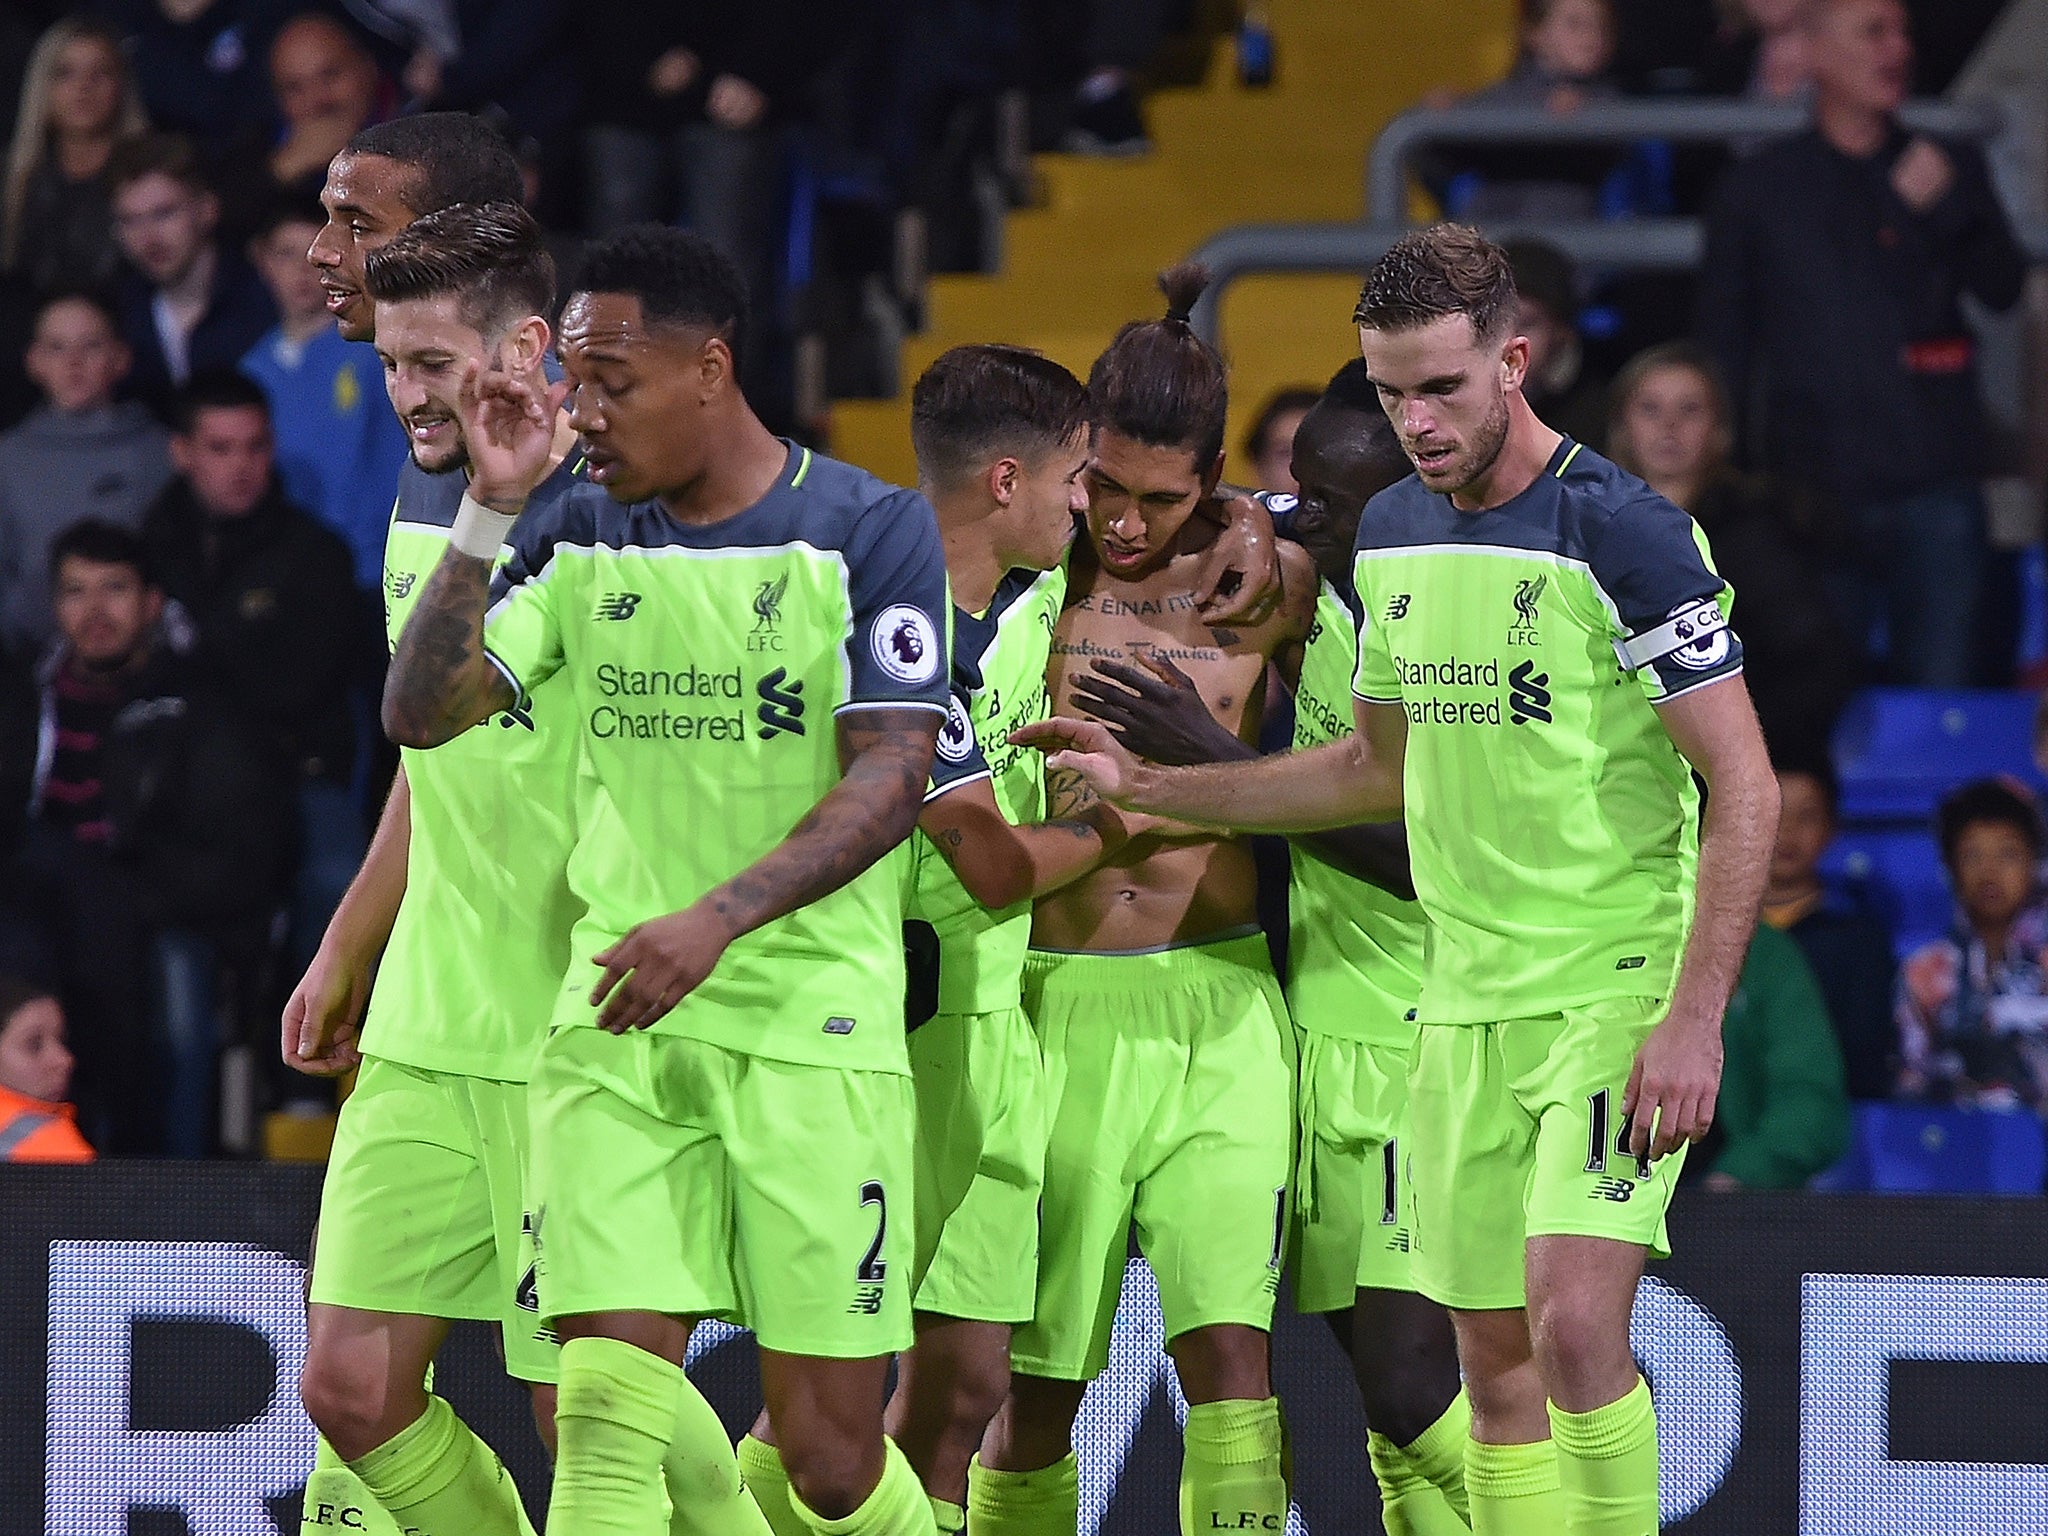 Firmino's strike capped off an enthralling game and devastating Liverpool display